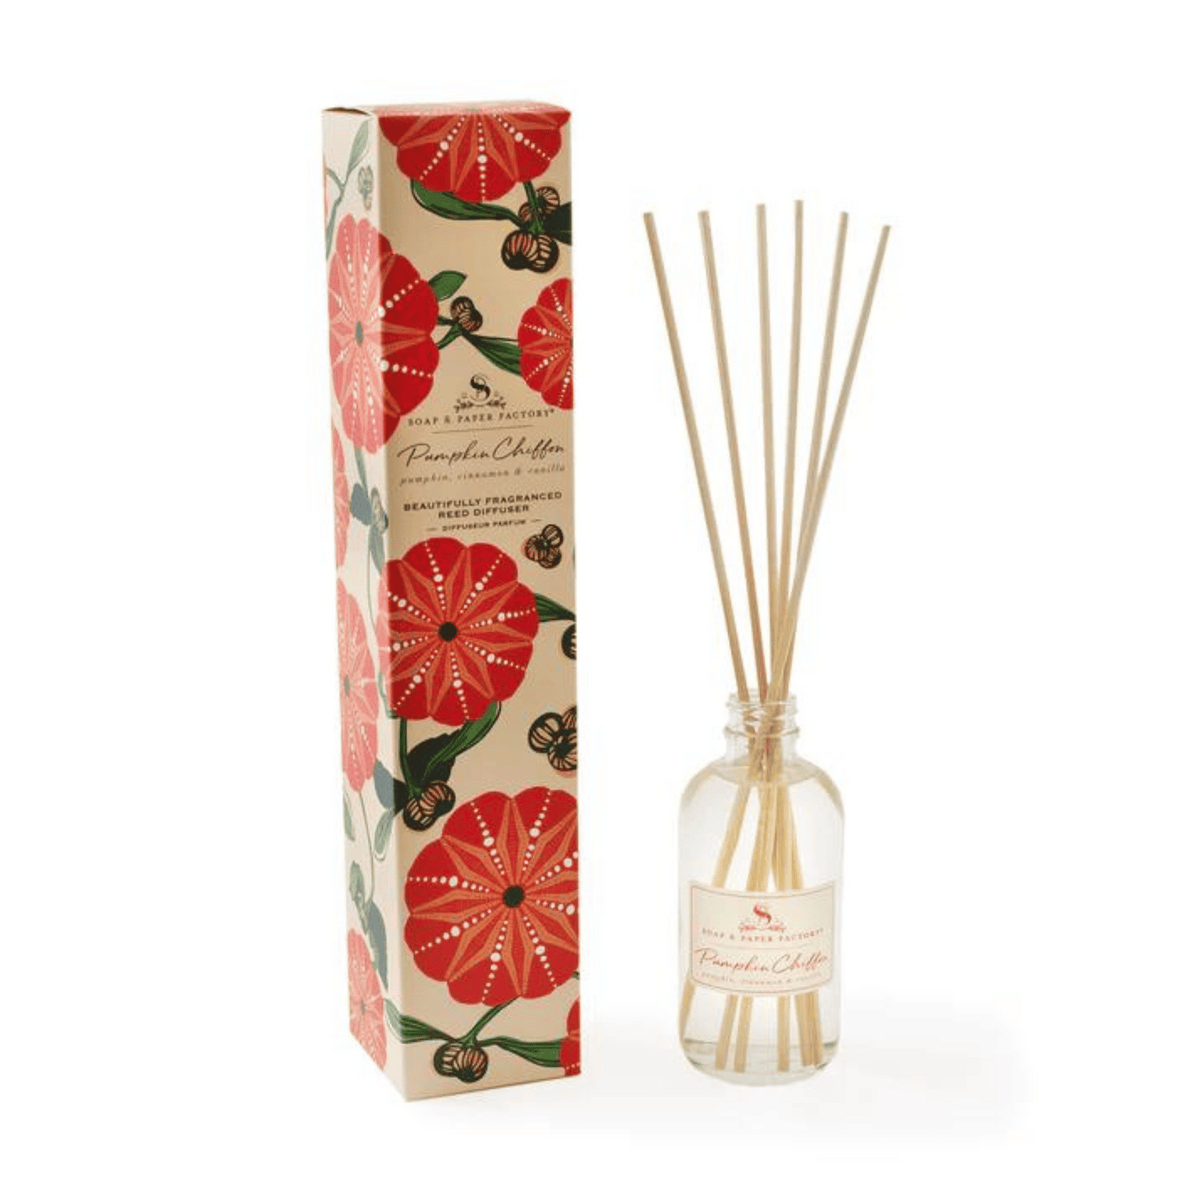 Primary Image of Pumpkin Chiffon Reed Diffuser